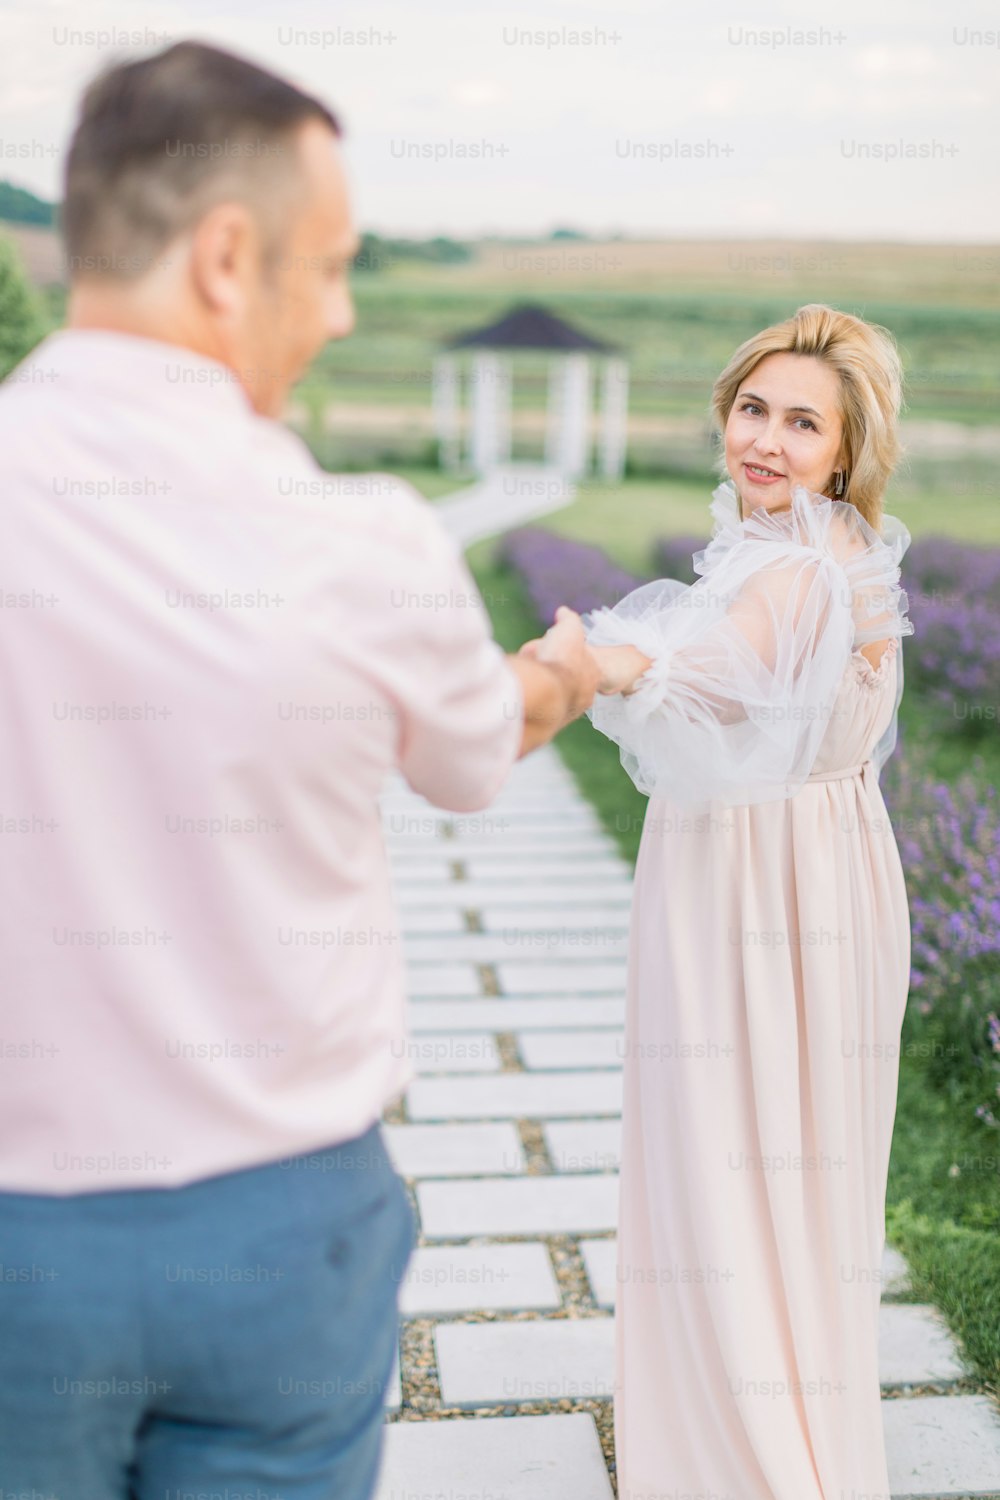 Give me your hand, follow me. Love through the years together. Pretty charming blond mature lady in elegant dress, holding hand and walking with her handsome man outdoors in lavender field with gazebo